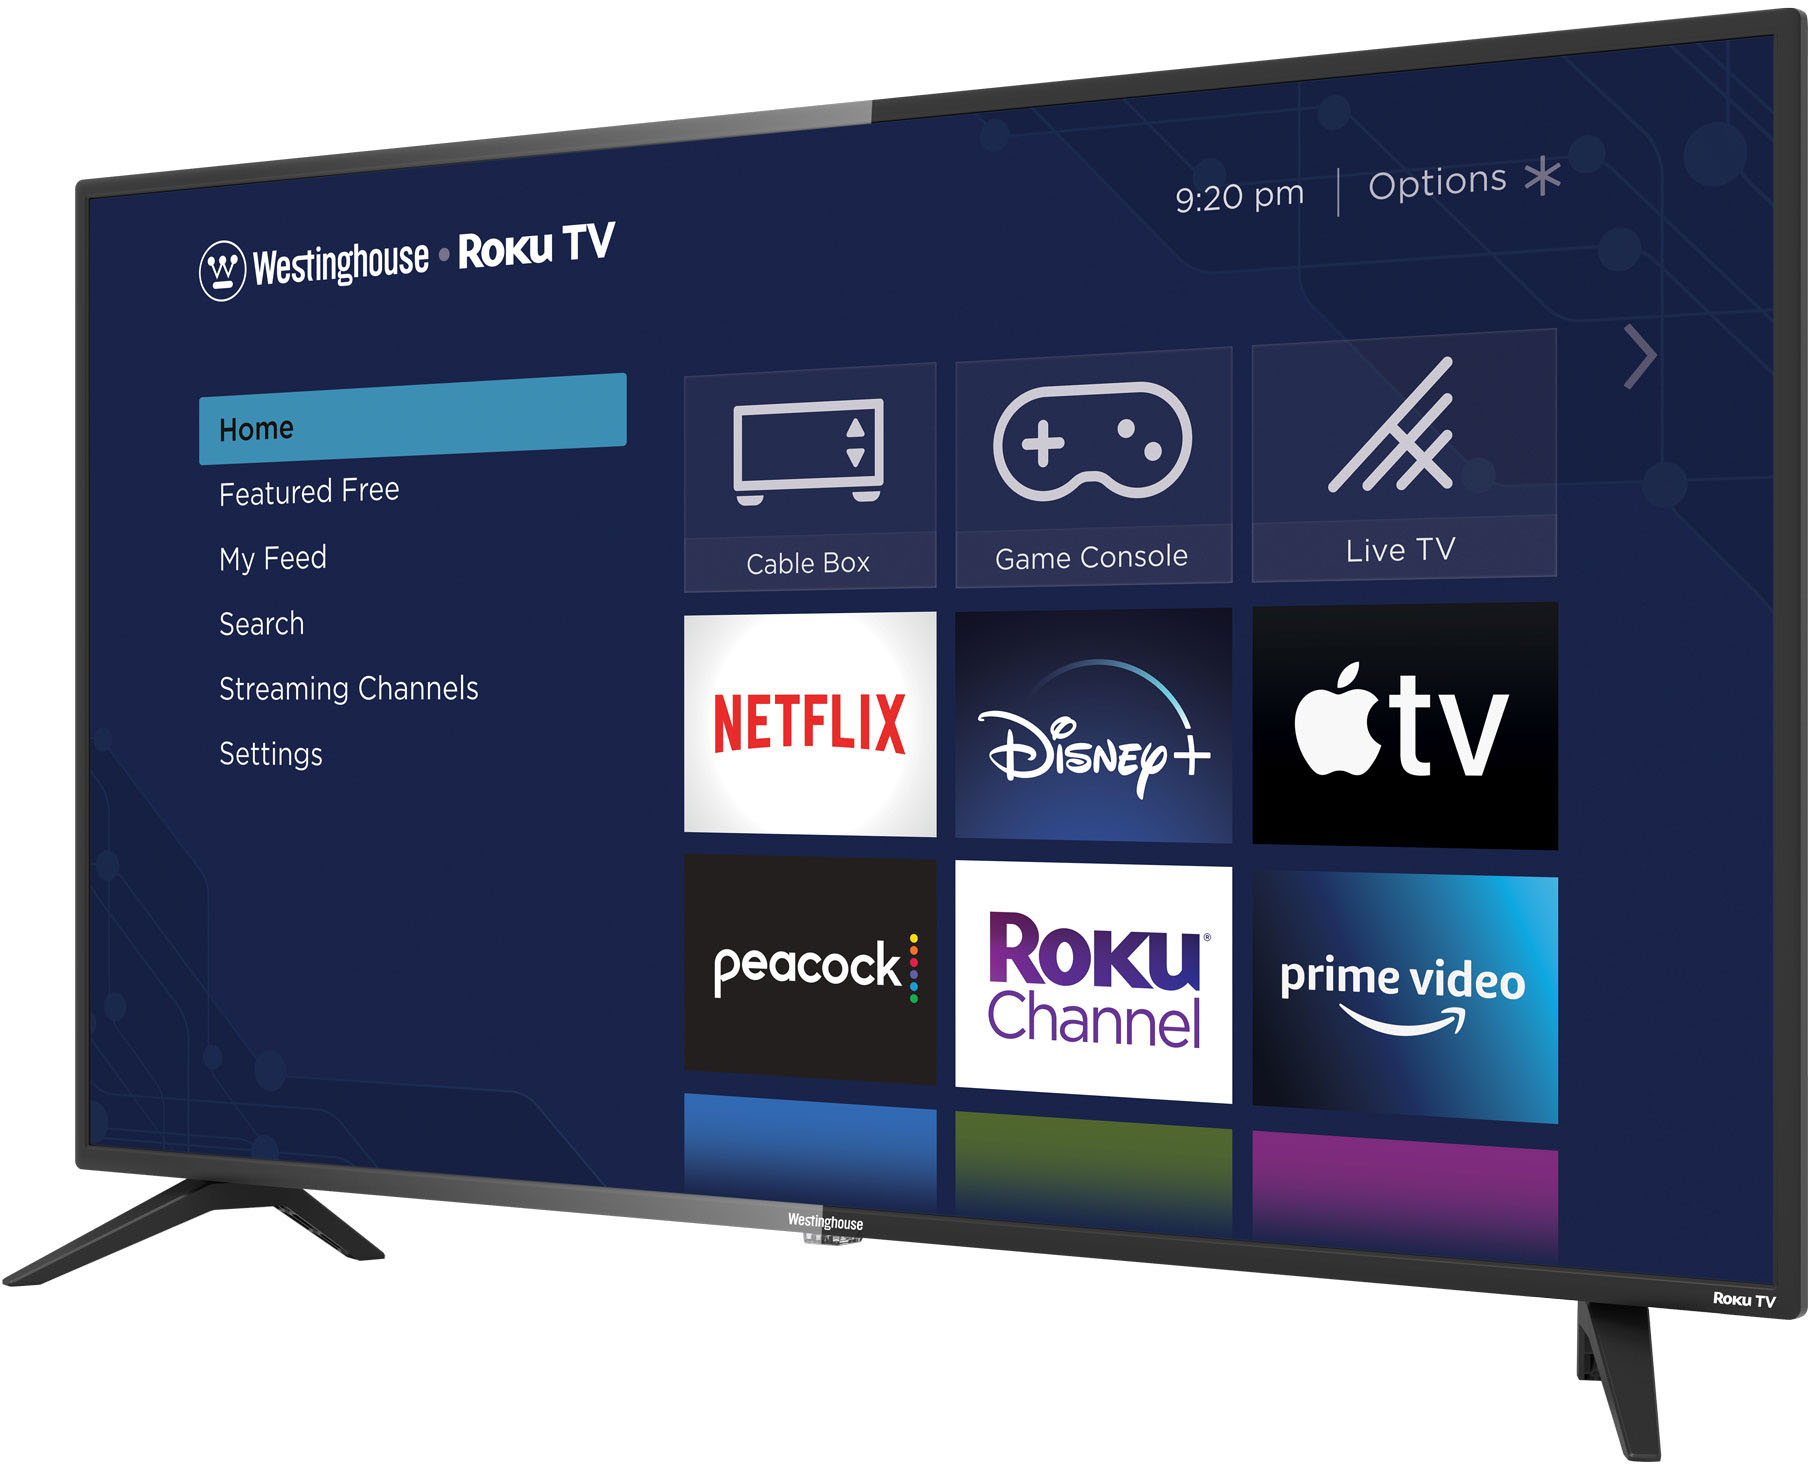 Westinghouse WR43FX2212 43-inch FHD Smart Roku TV for $209.99 Free shipping $209.98